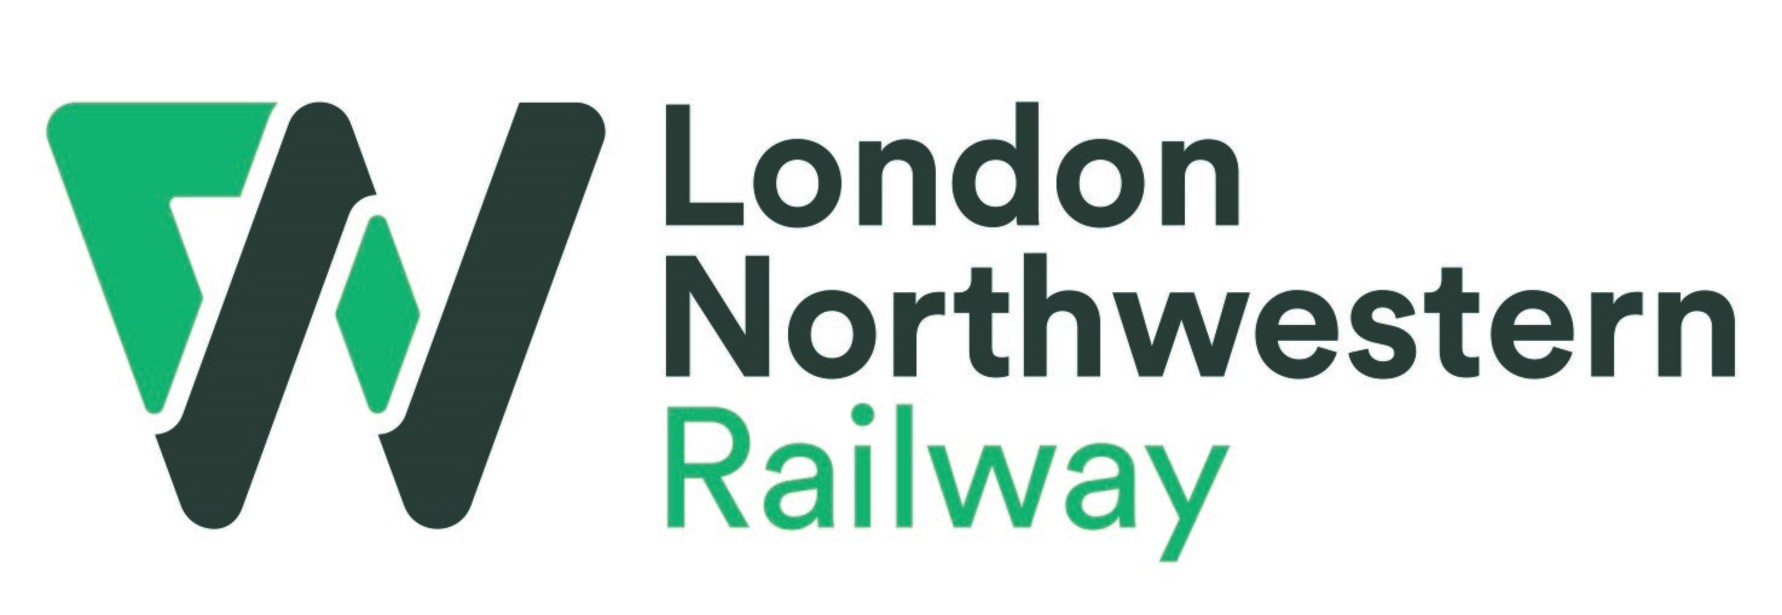 London Northwestern Railway: Passengers urged to check their journeys ahead of industrial action